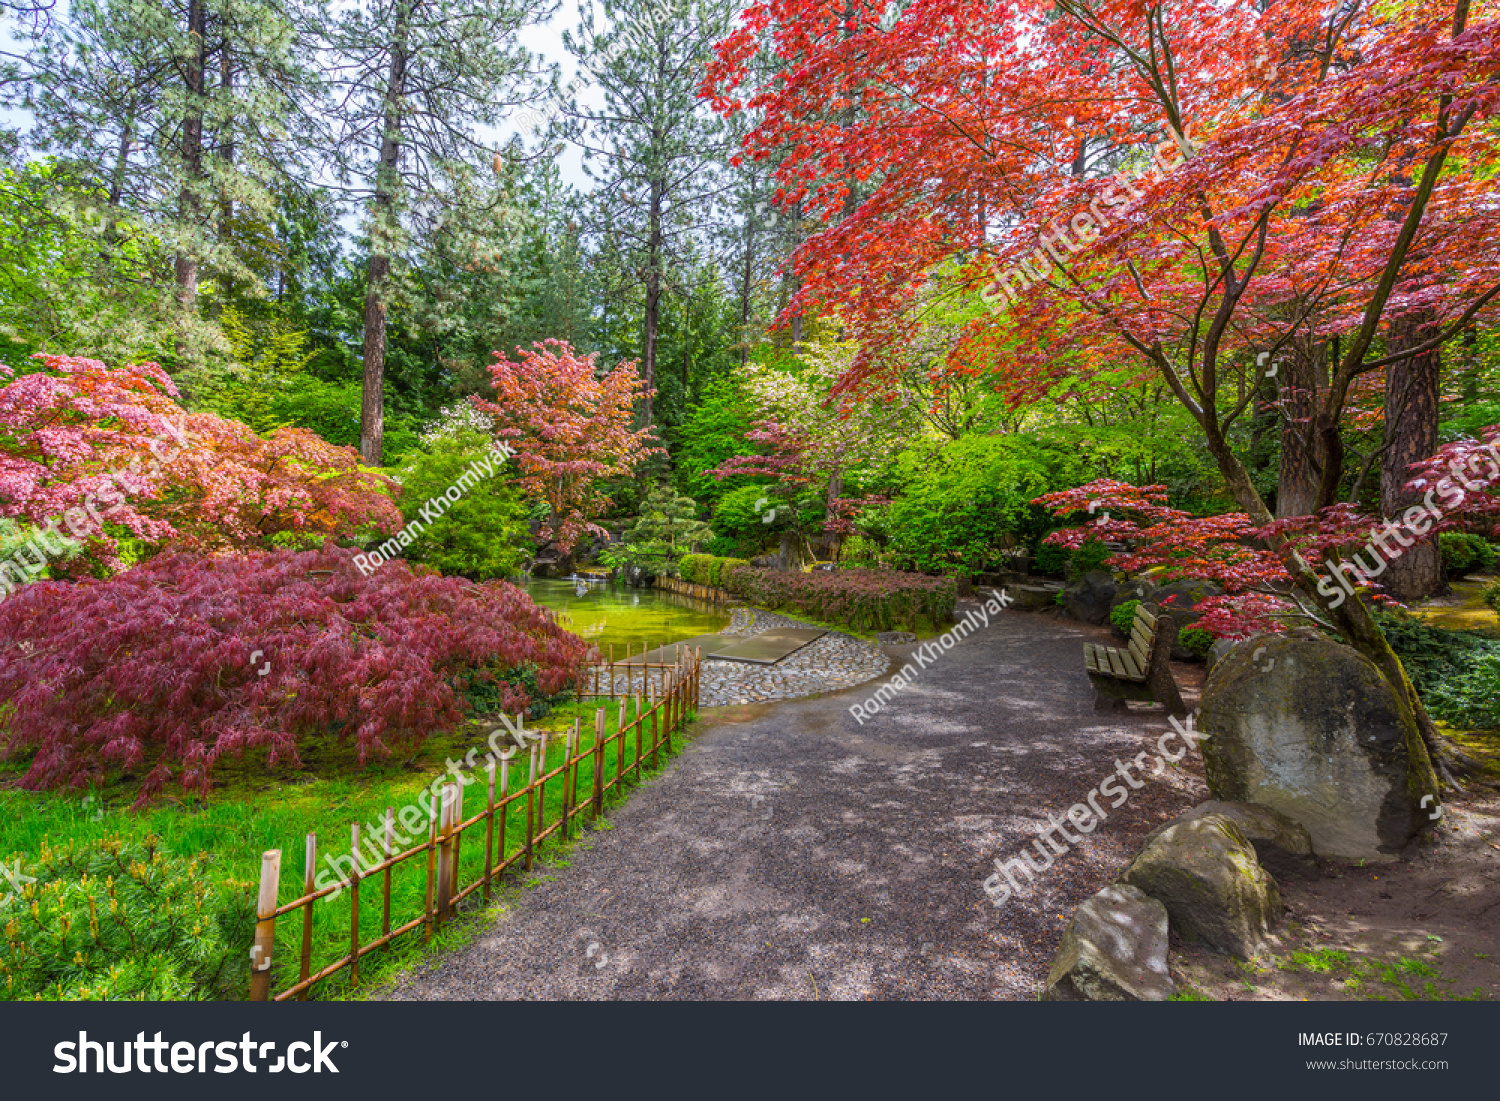 Colorful Park Japanese Style Manito Park Stock Image Download Now